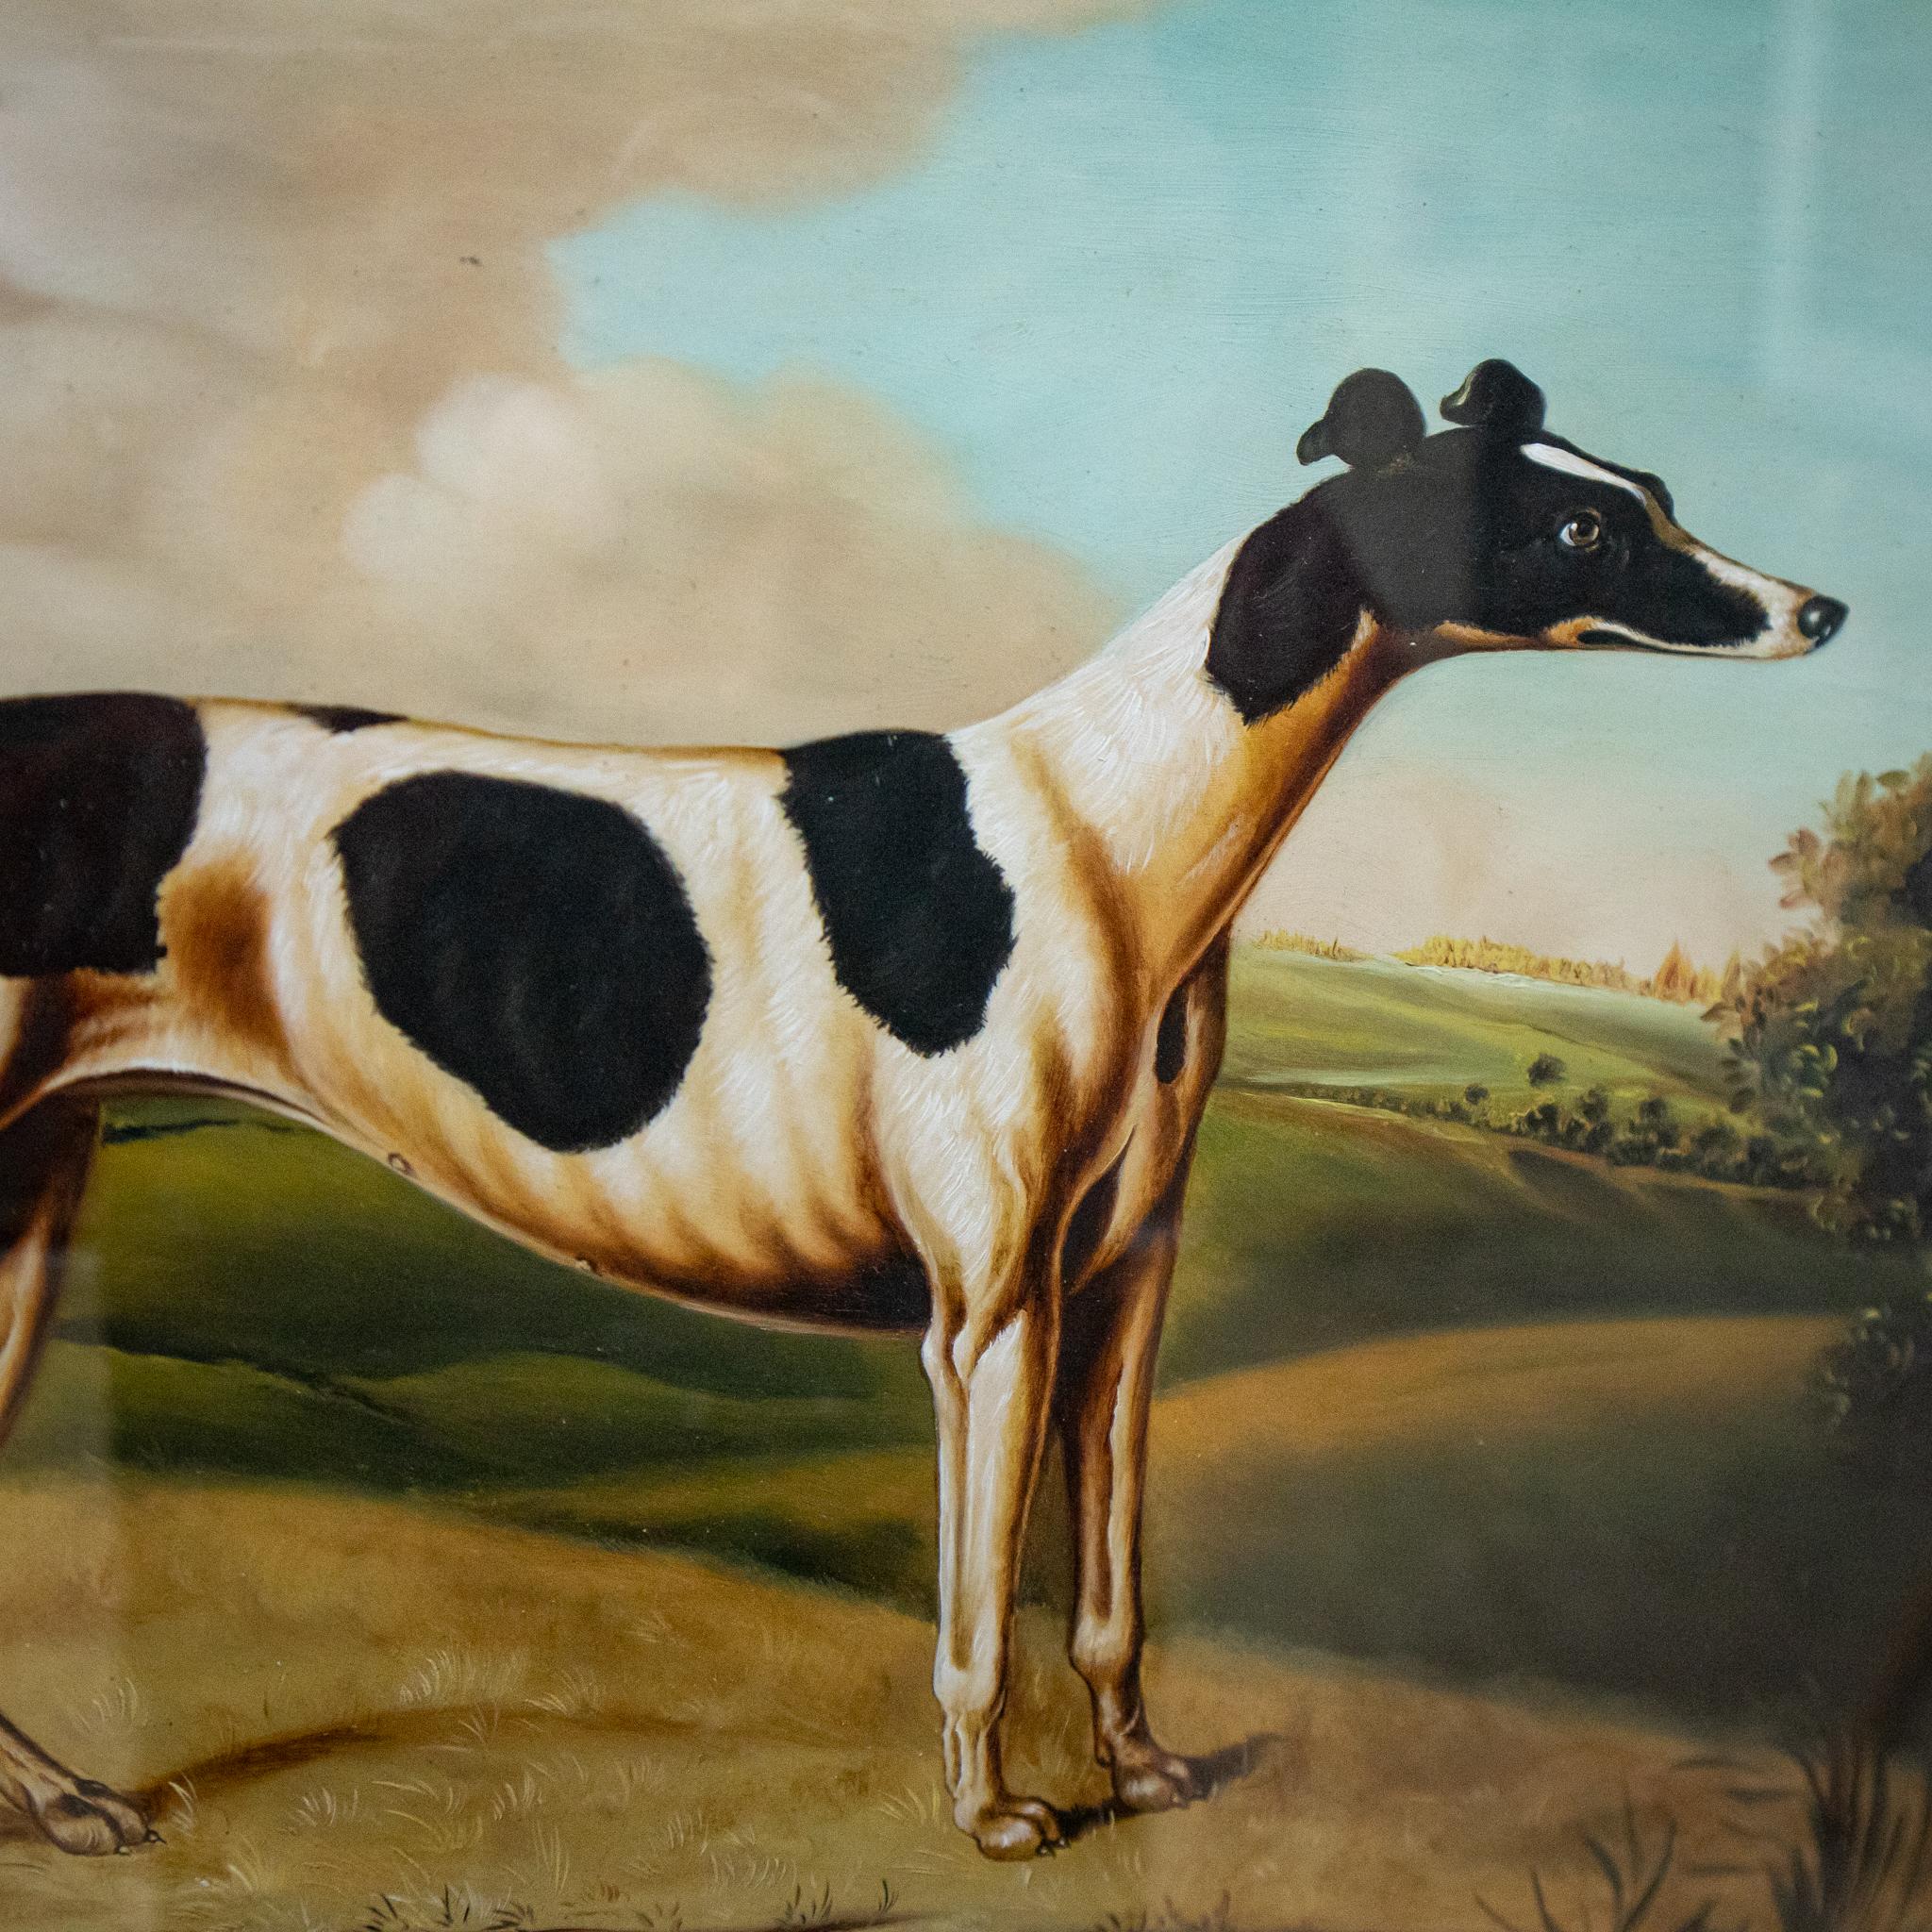 An attractive 19th century painting of a black and white greyhound standing in a green landscape with a pleasant blue sky. It is glazed and framed in a period bird’s eye maple surround and will make a lovely piece for a Victorian interior in a